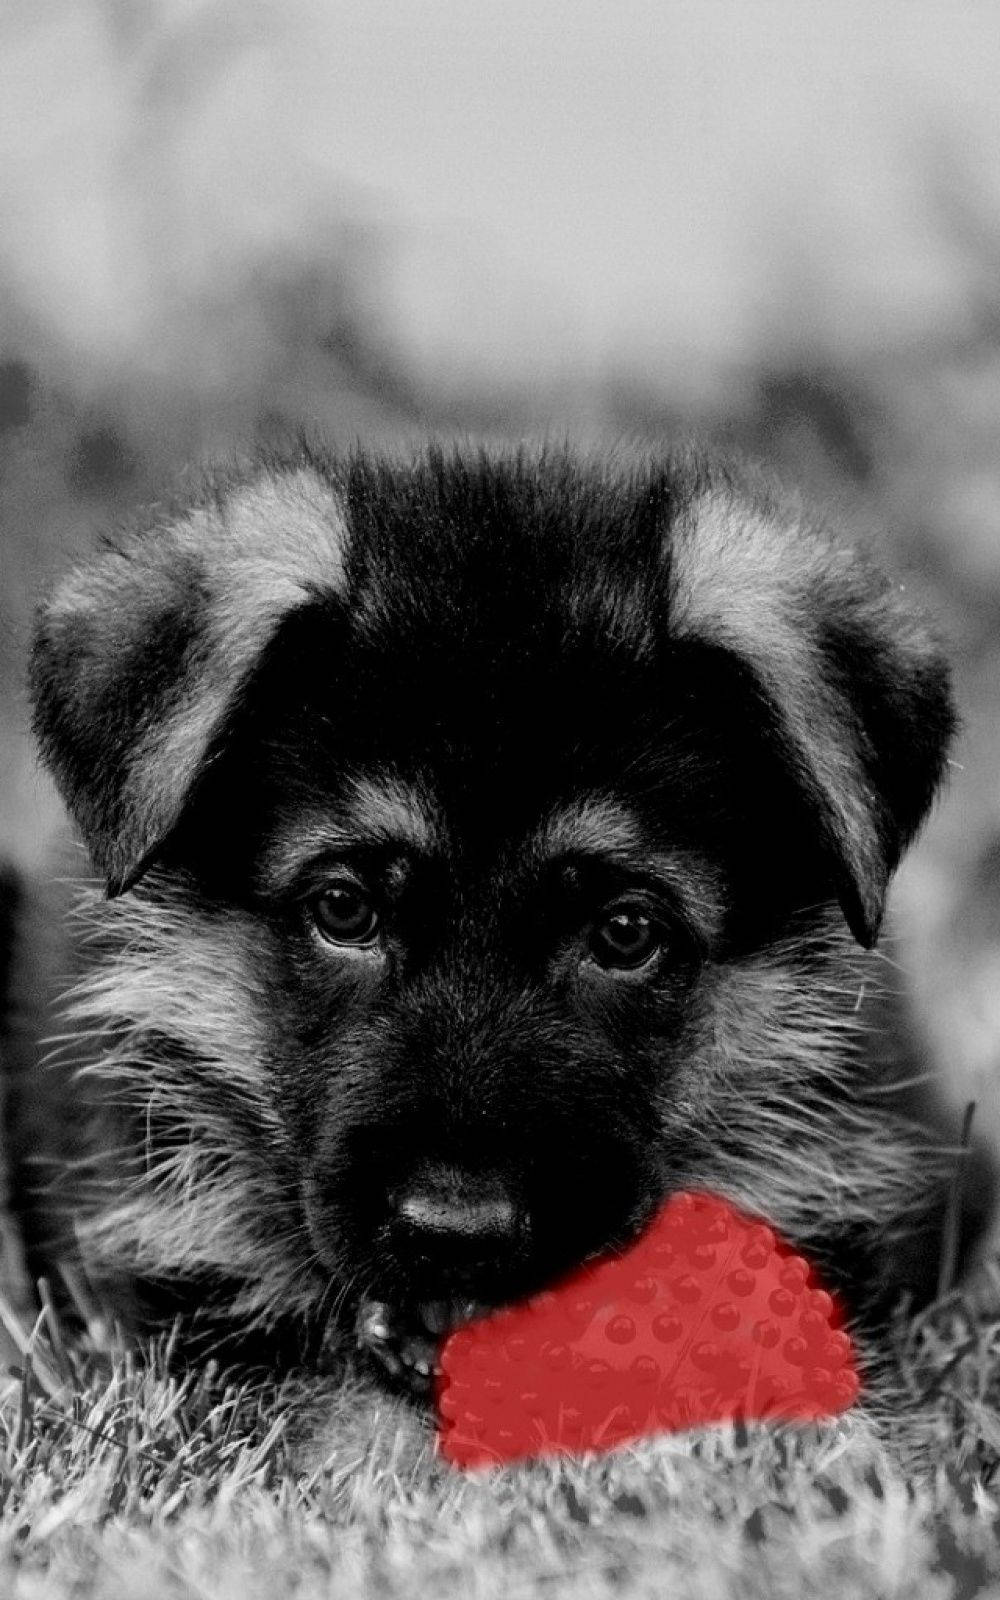 Black And White Dog Plays With A Red Ball Wallpaper